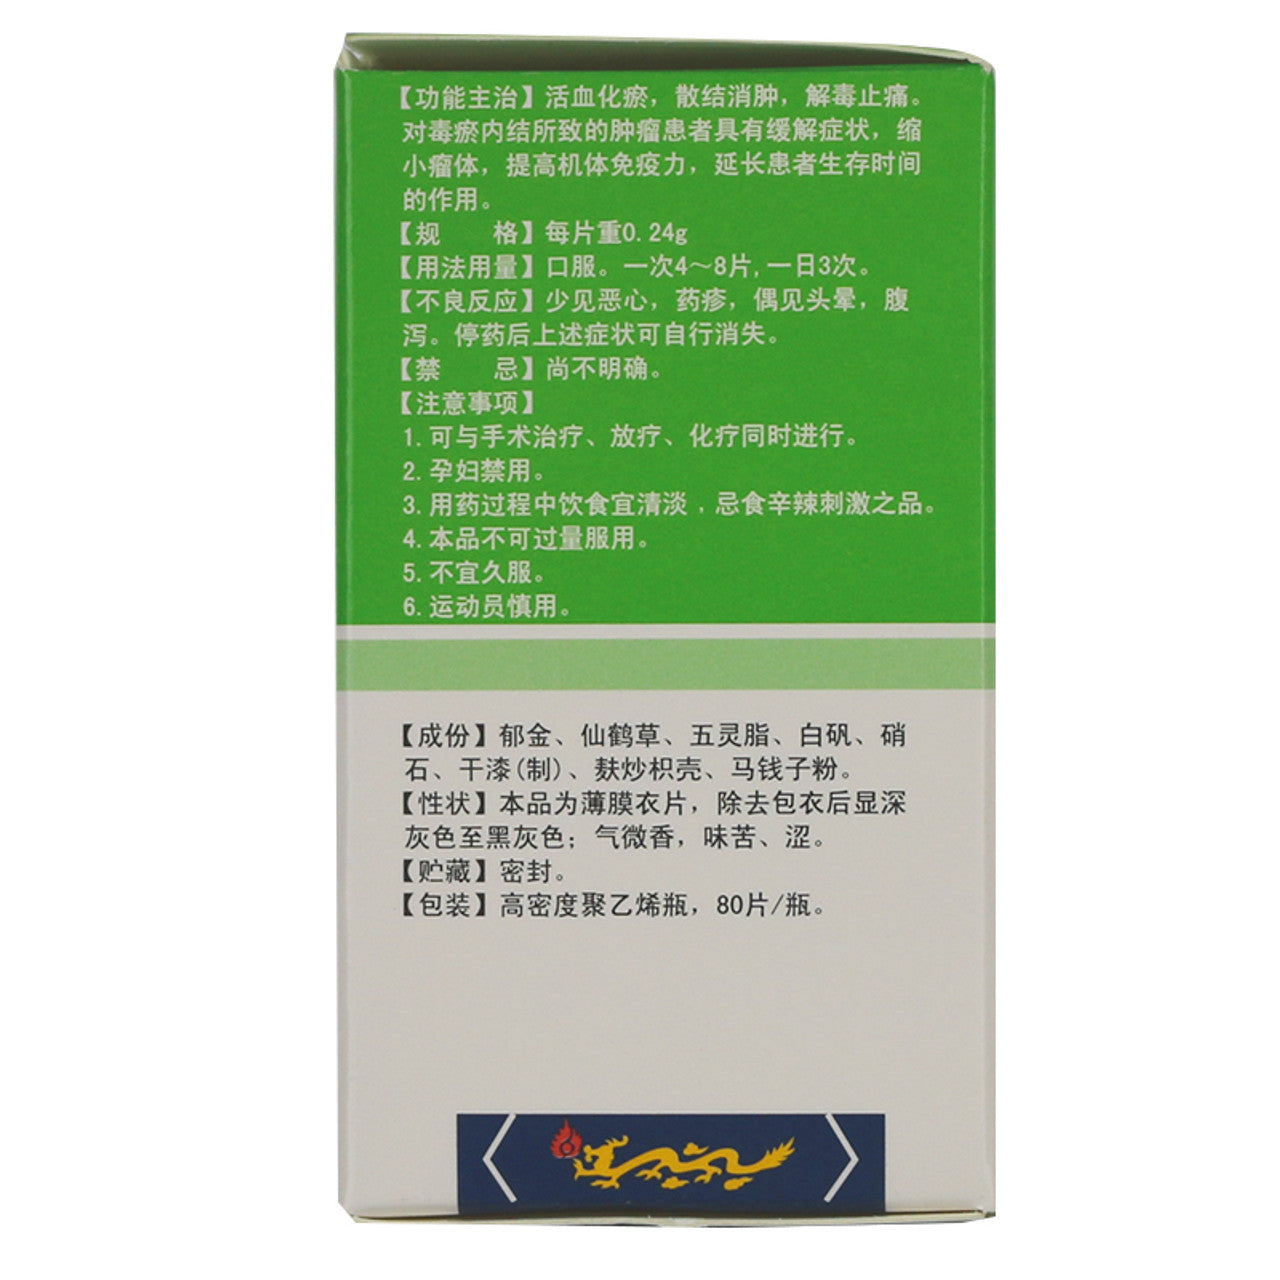 Herbal Medicine. PingxiaoPian / Pingxiao Pian / Pingxiao Tablets / Ping Xiao Pian / Ping Xiao Tablets for Promoting blood circulation and removing blood stasis, dissipating masses and reducing swelling, detoxification and pain relief, for tumors